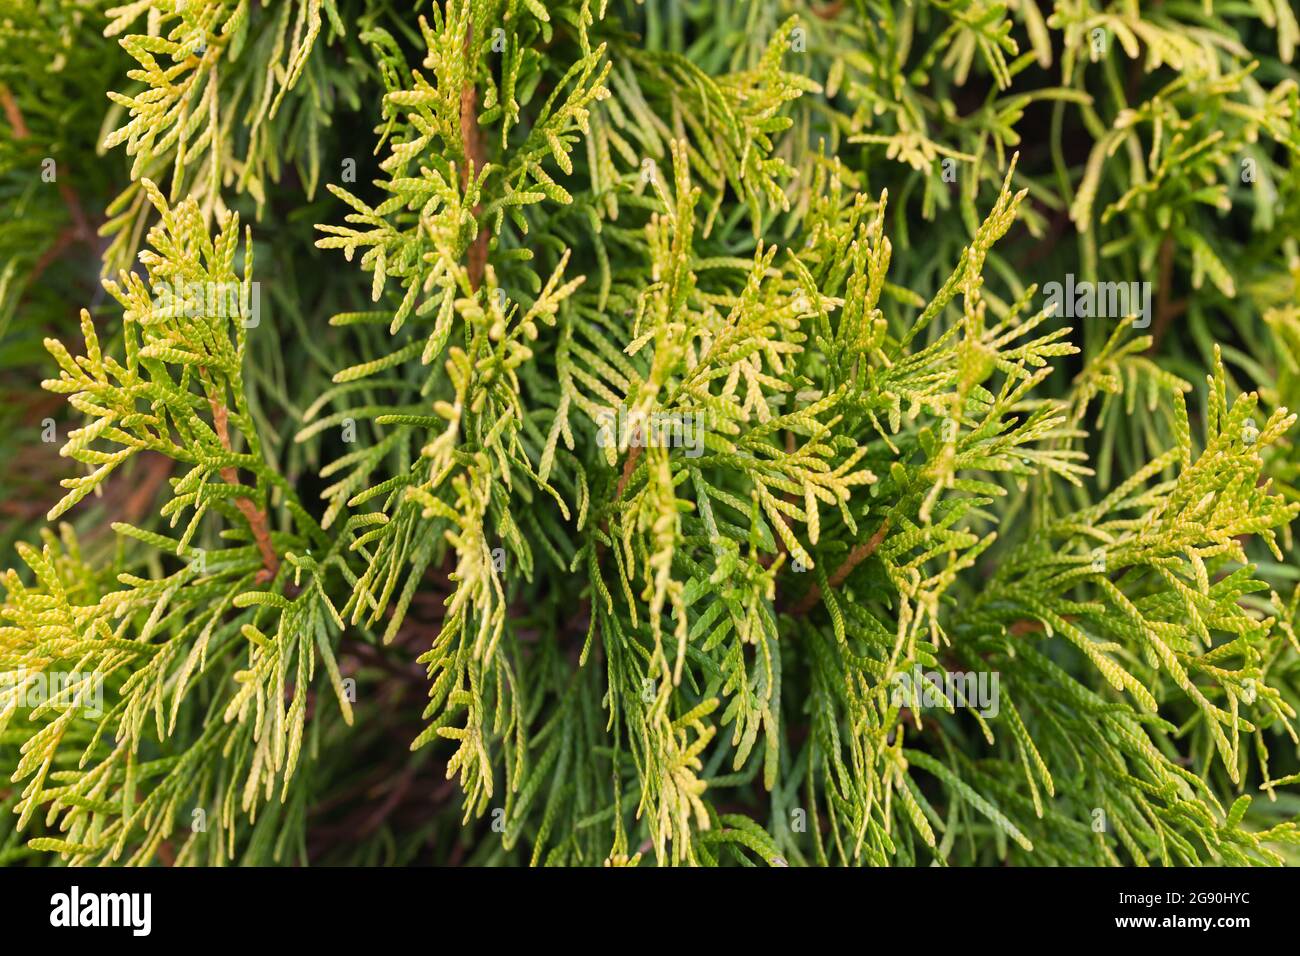 Yellow green leaves of thuja, decorative cultivar with golden branches Stock Photo